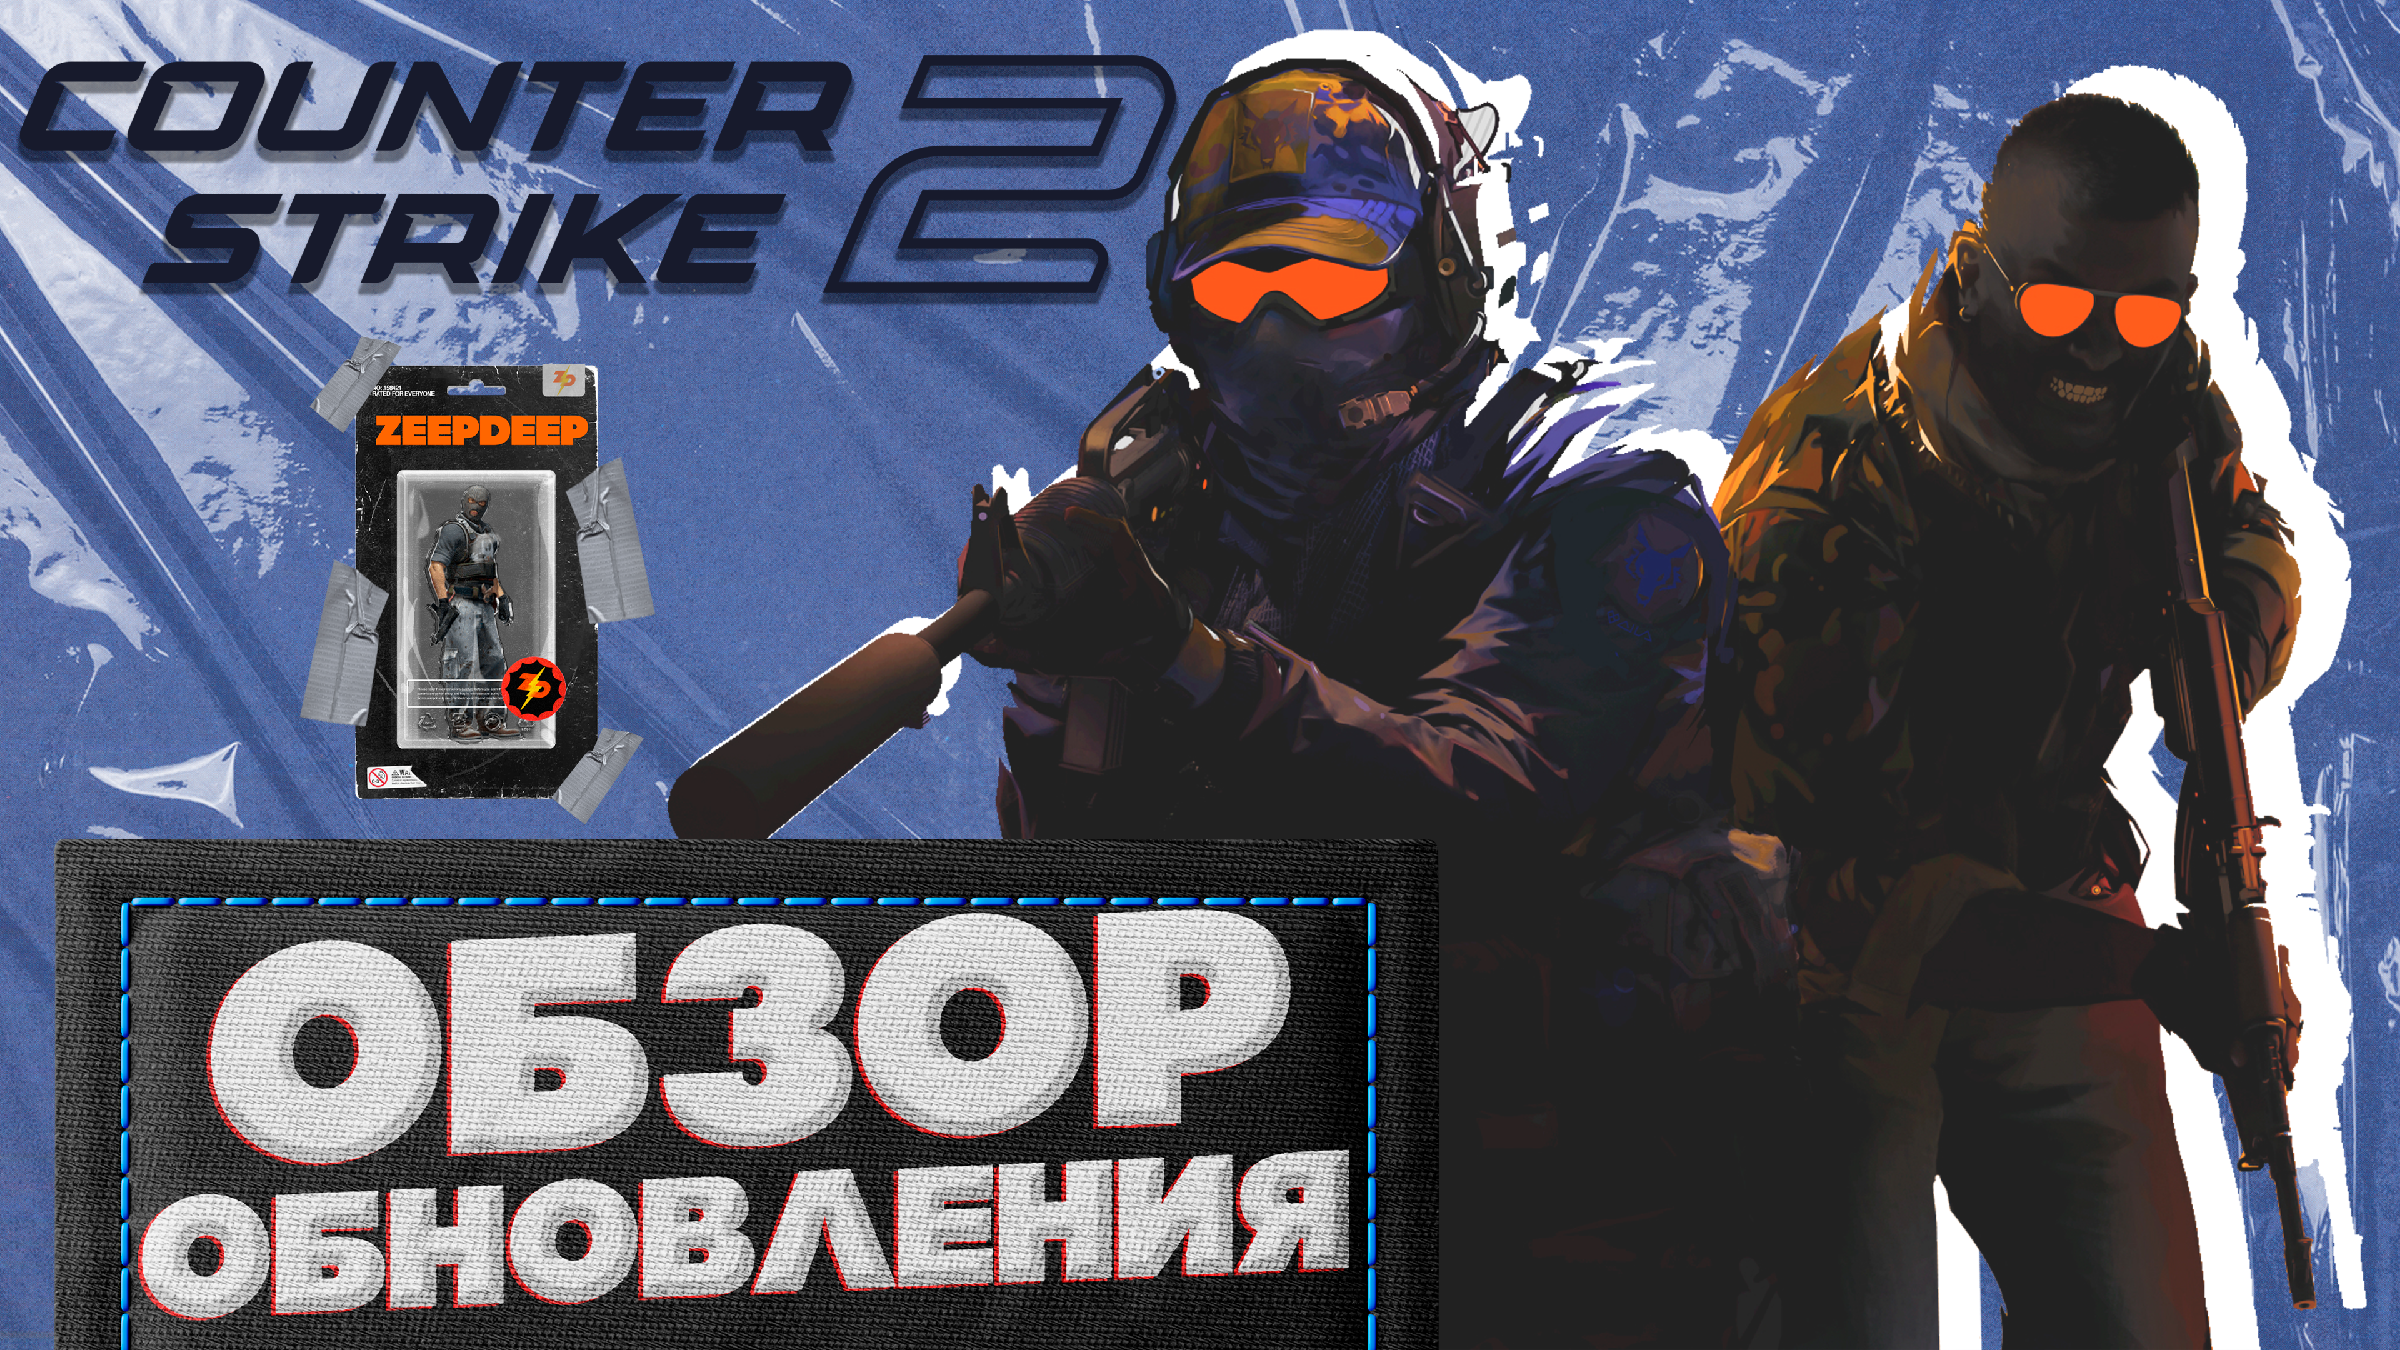 Counter Strike 2 - News, views, gossip, pictures, video - The Mirror